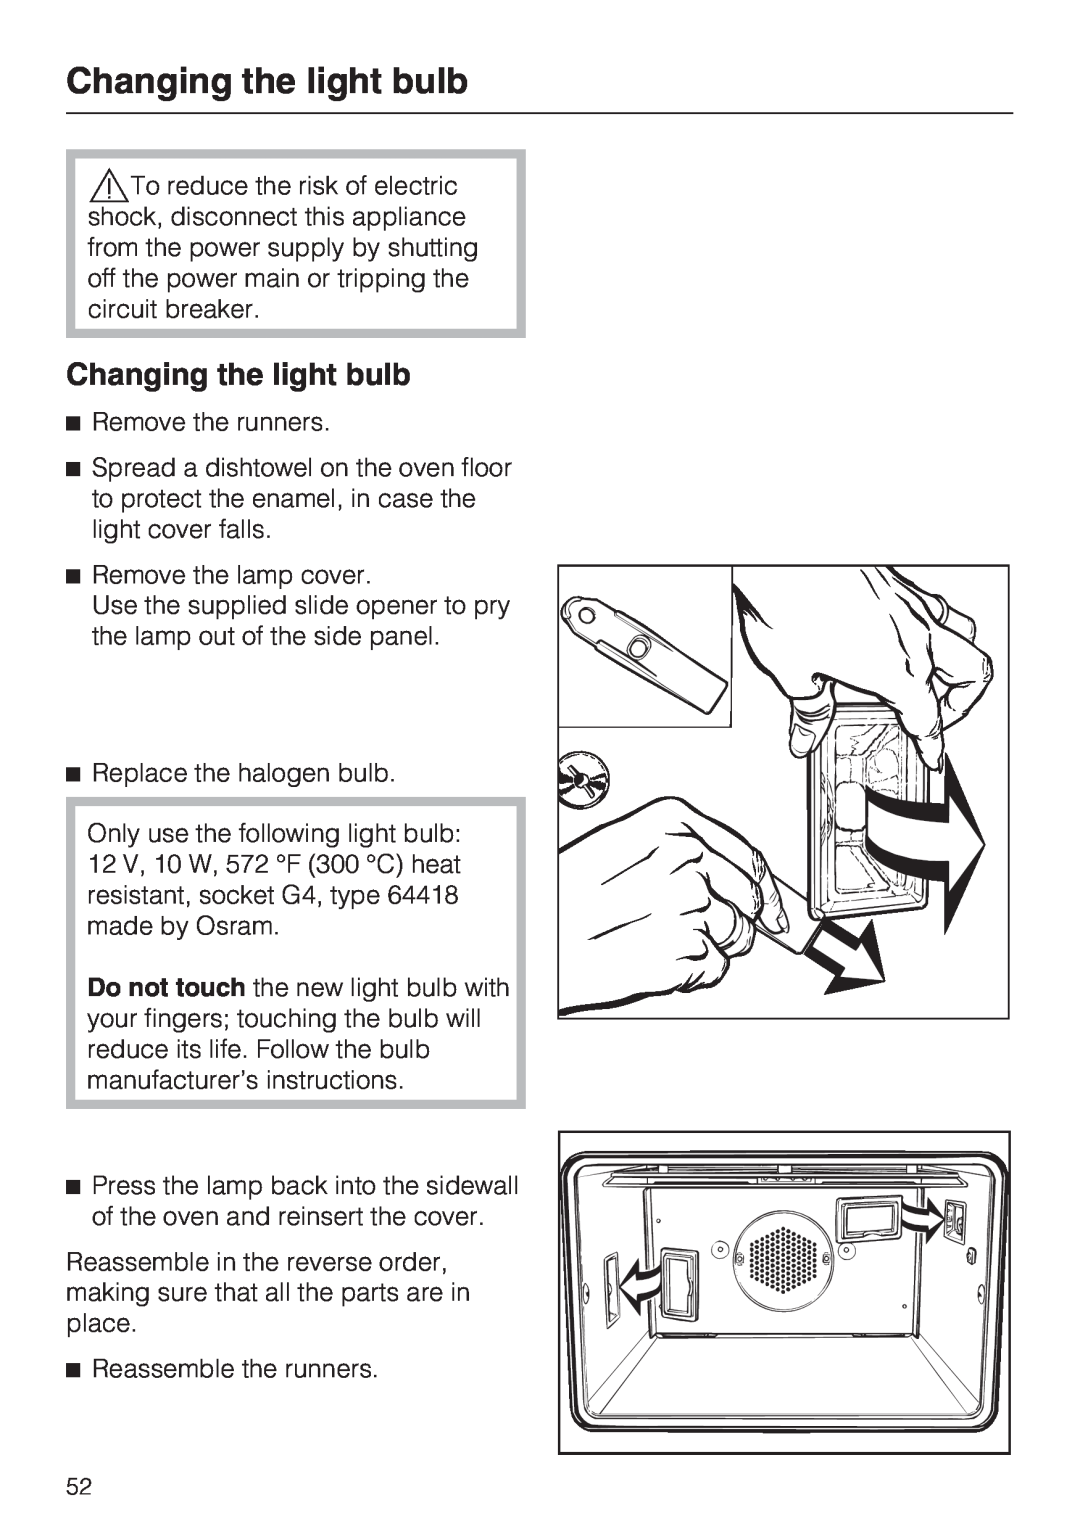 Miele H 4744 BP, H 4746 BP installation instructions Changing the light bulb 